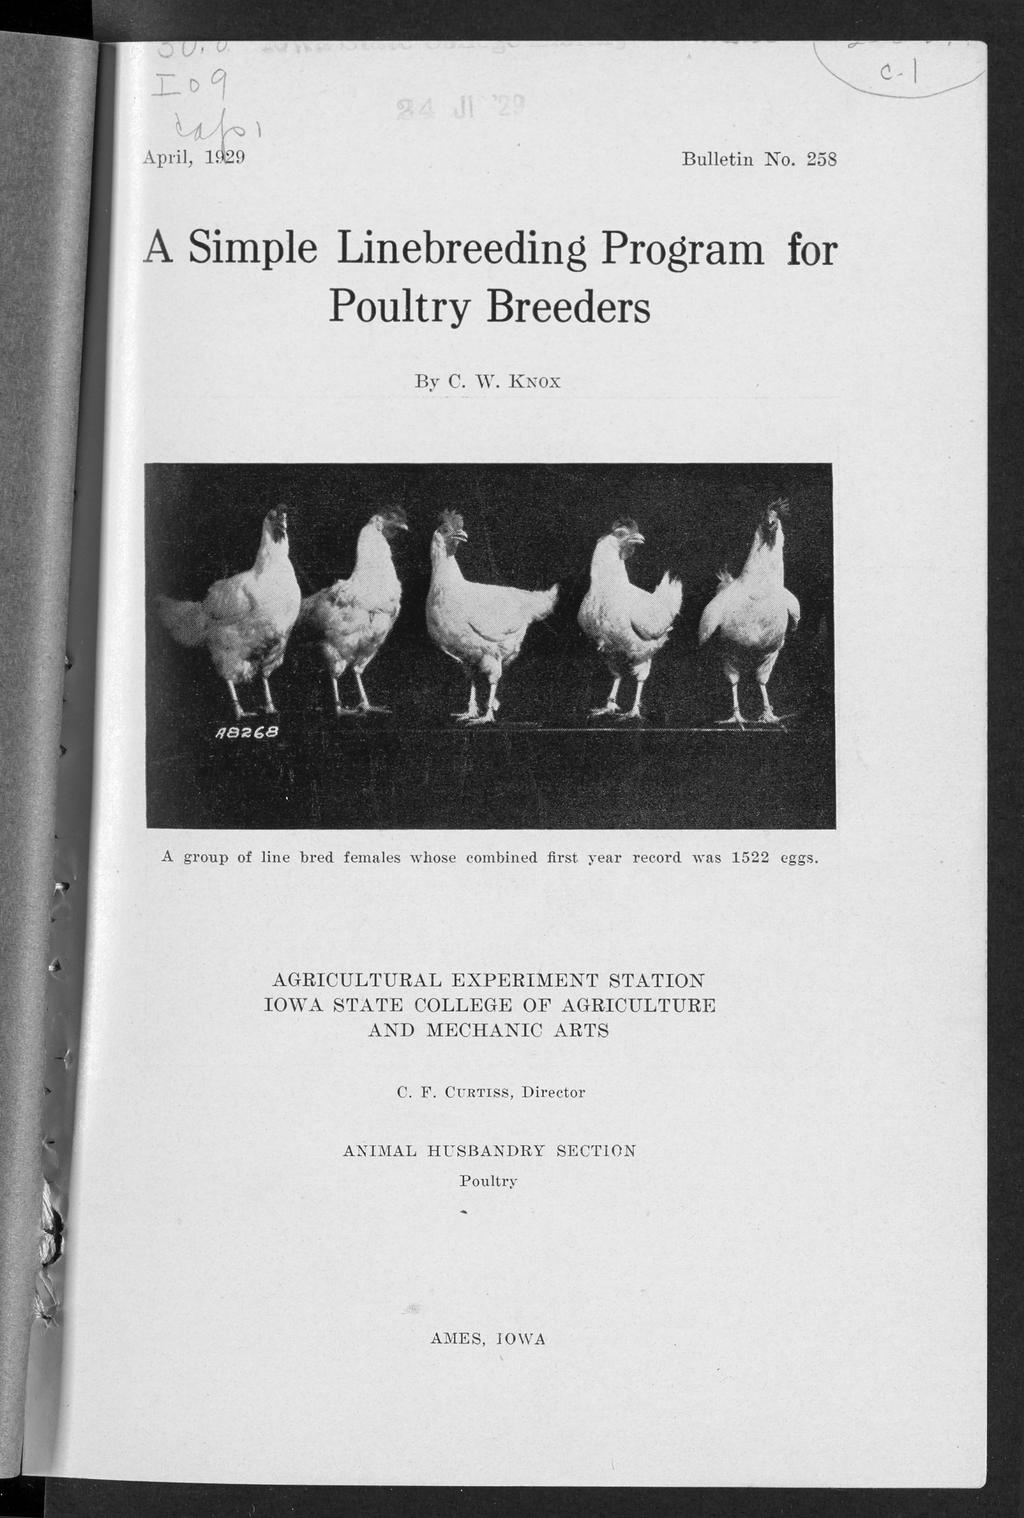 Knox: A simple linebreeding program for poultry breeders Bulletin No. 258 A Simple Linebreeding Program for Poultry Breeders By C. W.